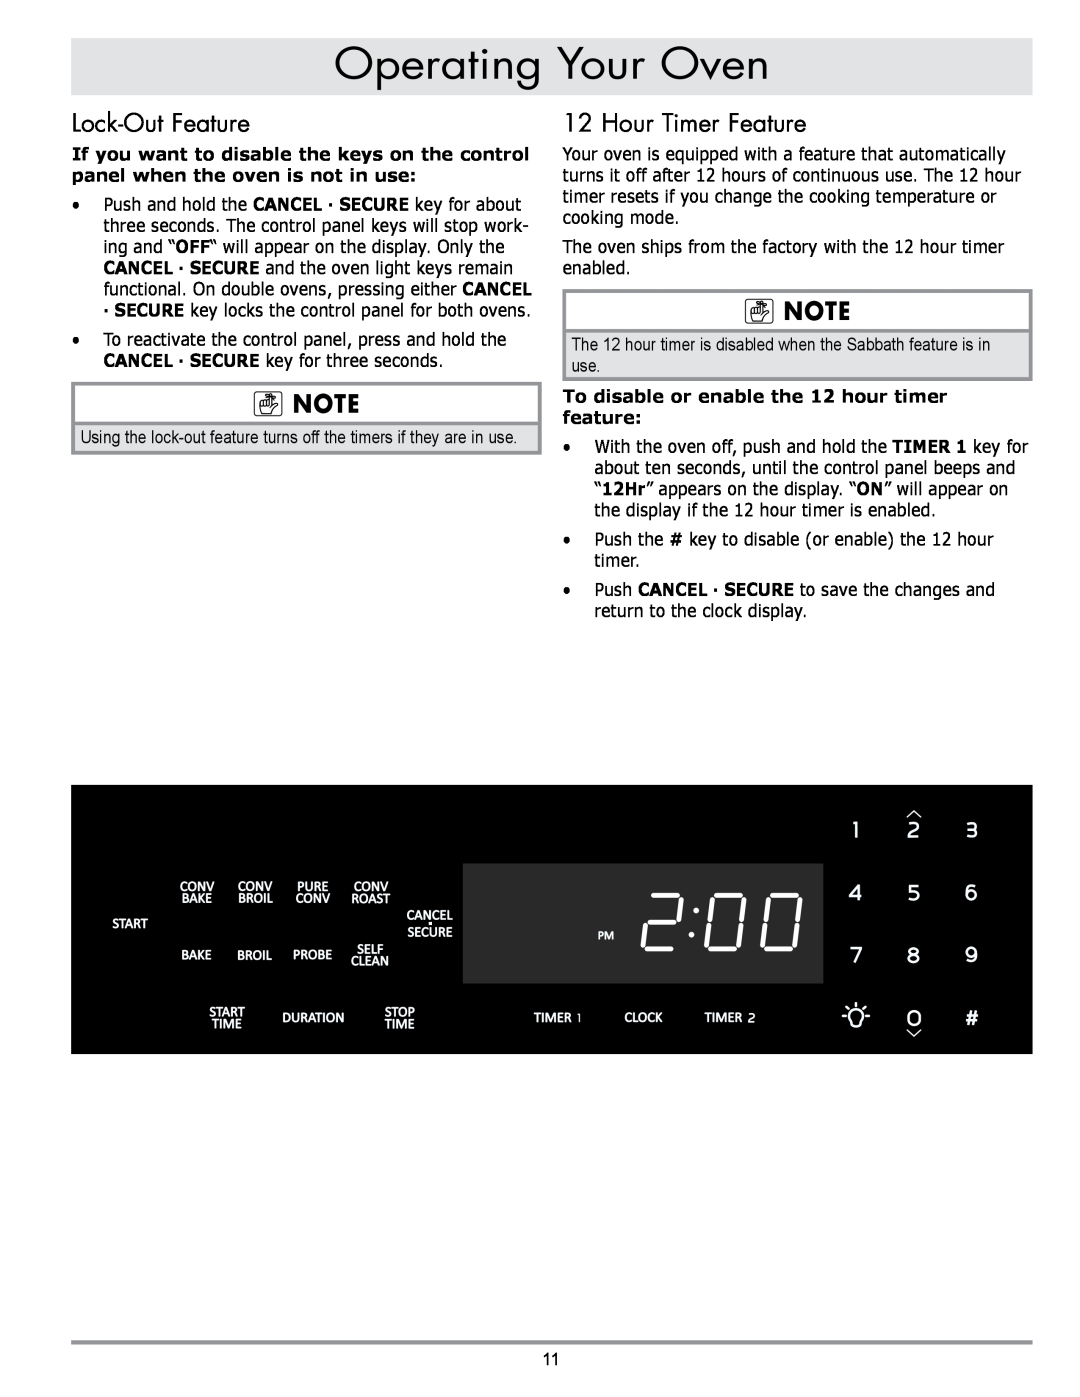 Dacor MORD230 Lock-Out Feature, Hour Timer Feature, To disable or enable the 12 hour timer feature, Operating Your Oven 